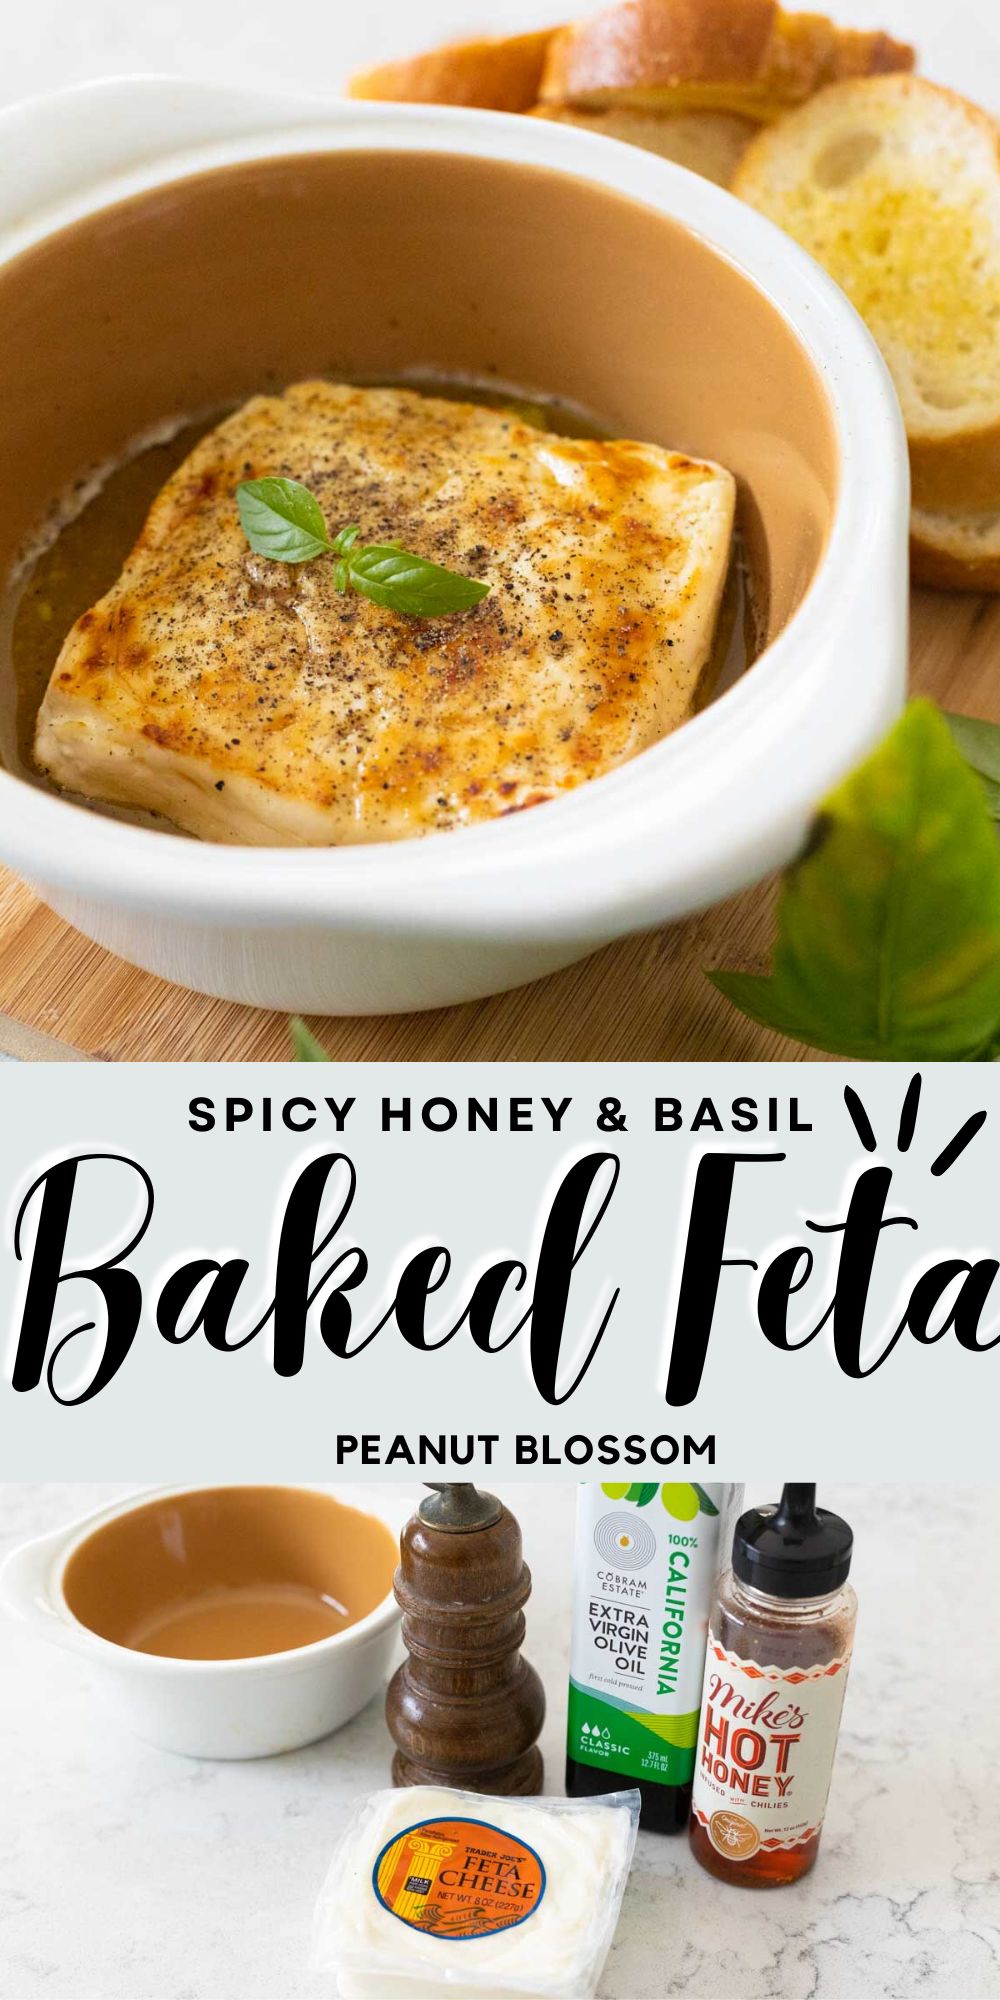 The photo collage shows the baked feta on top and the ingredients to make it below. 